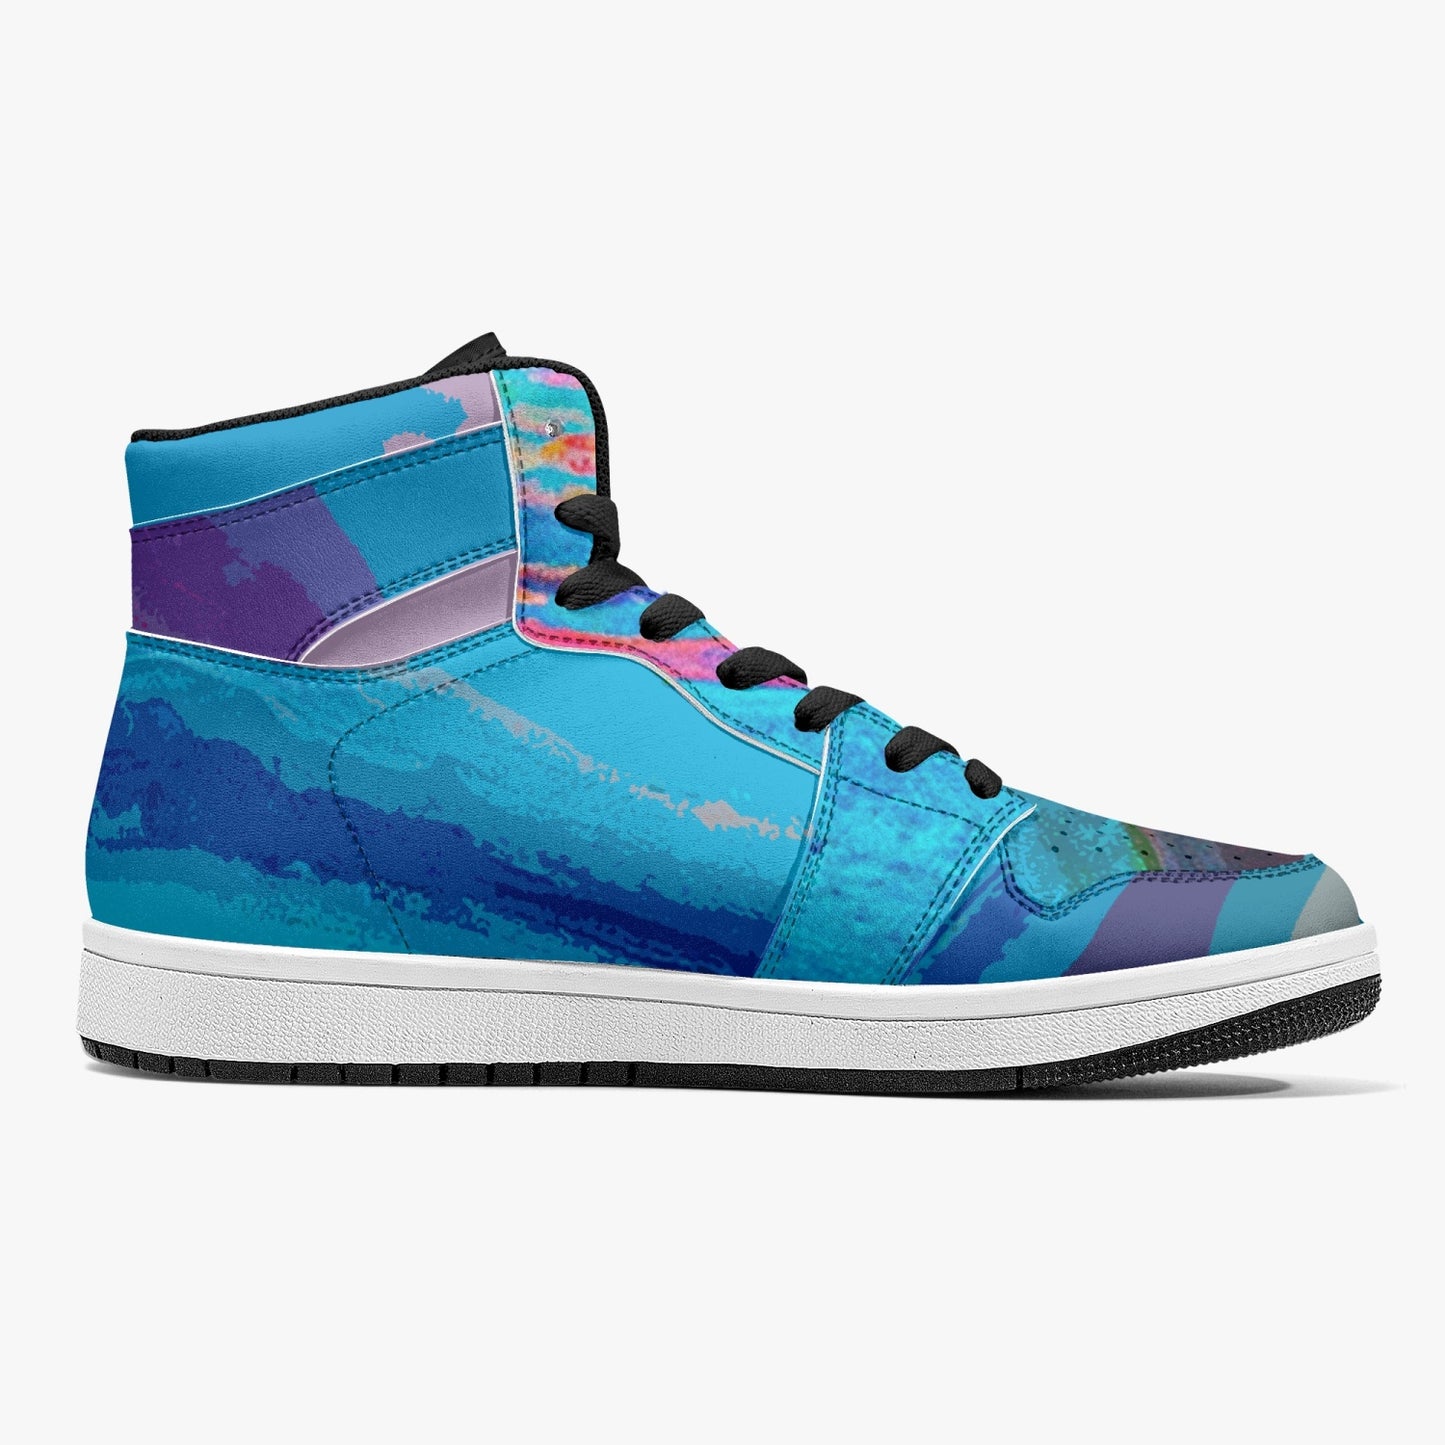 Almost Blue - Macr.in (High-Top Leather Sneakers)